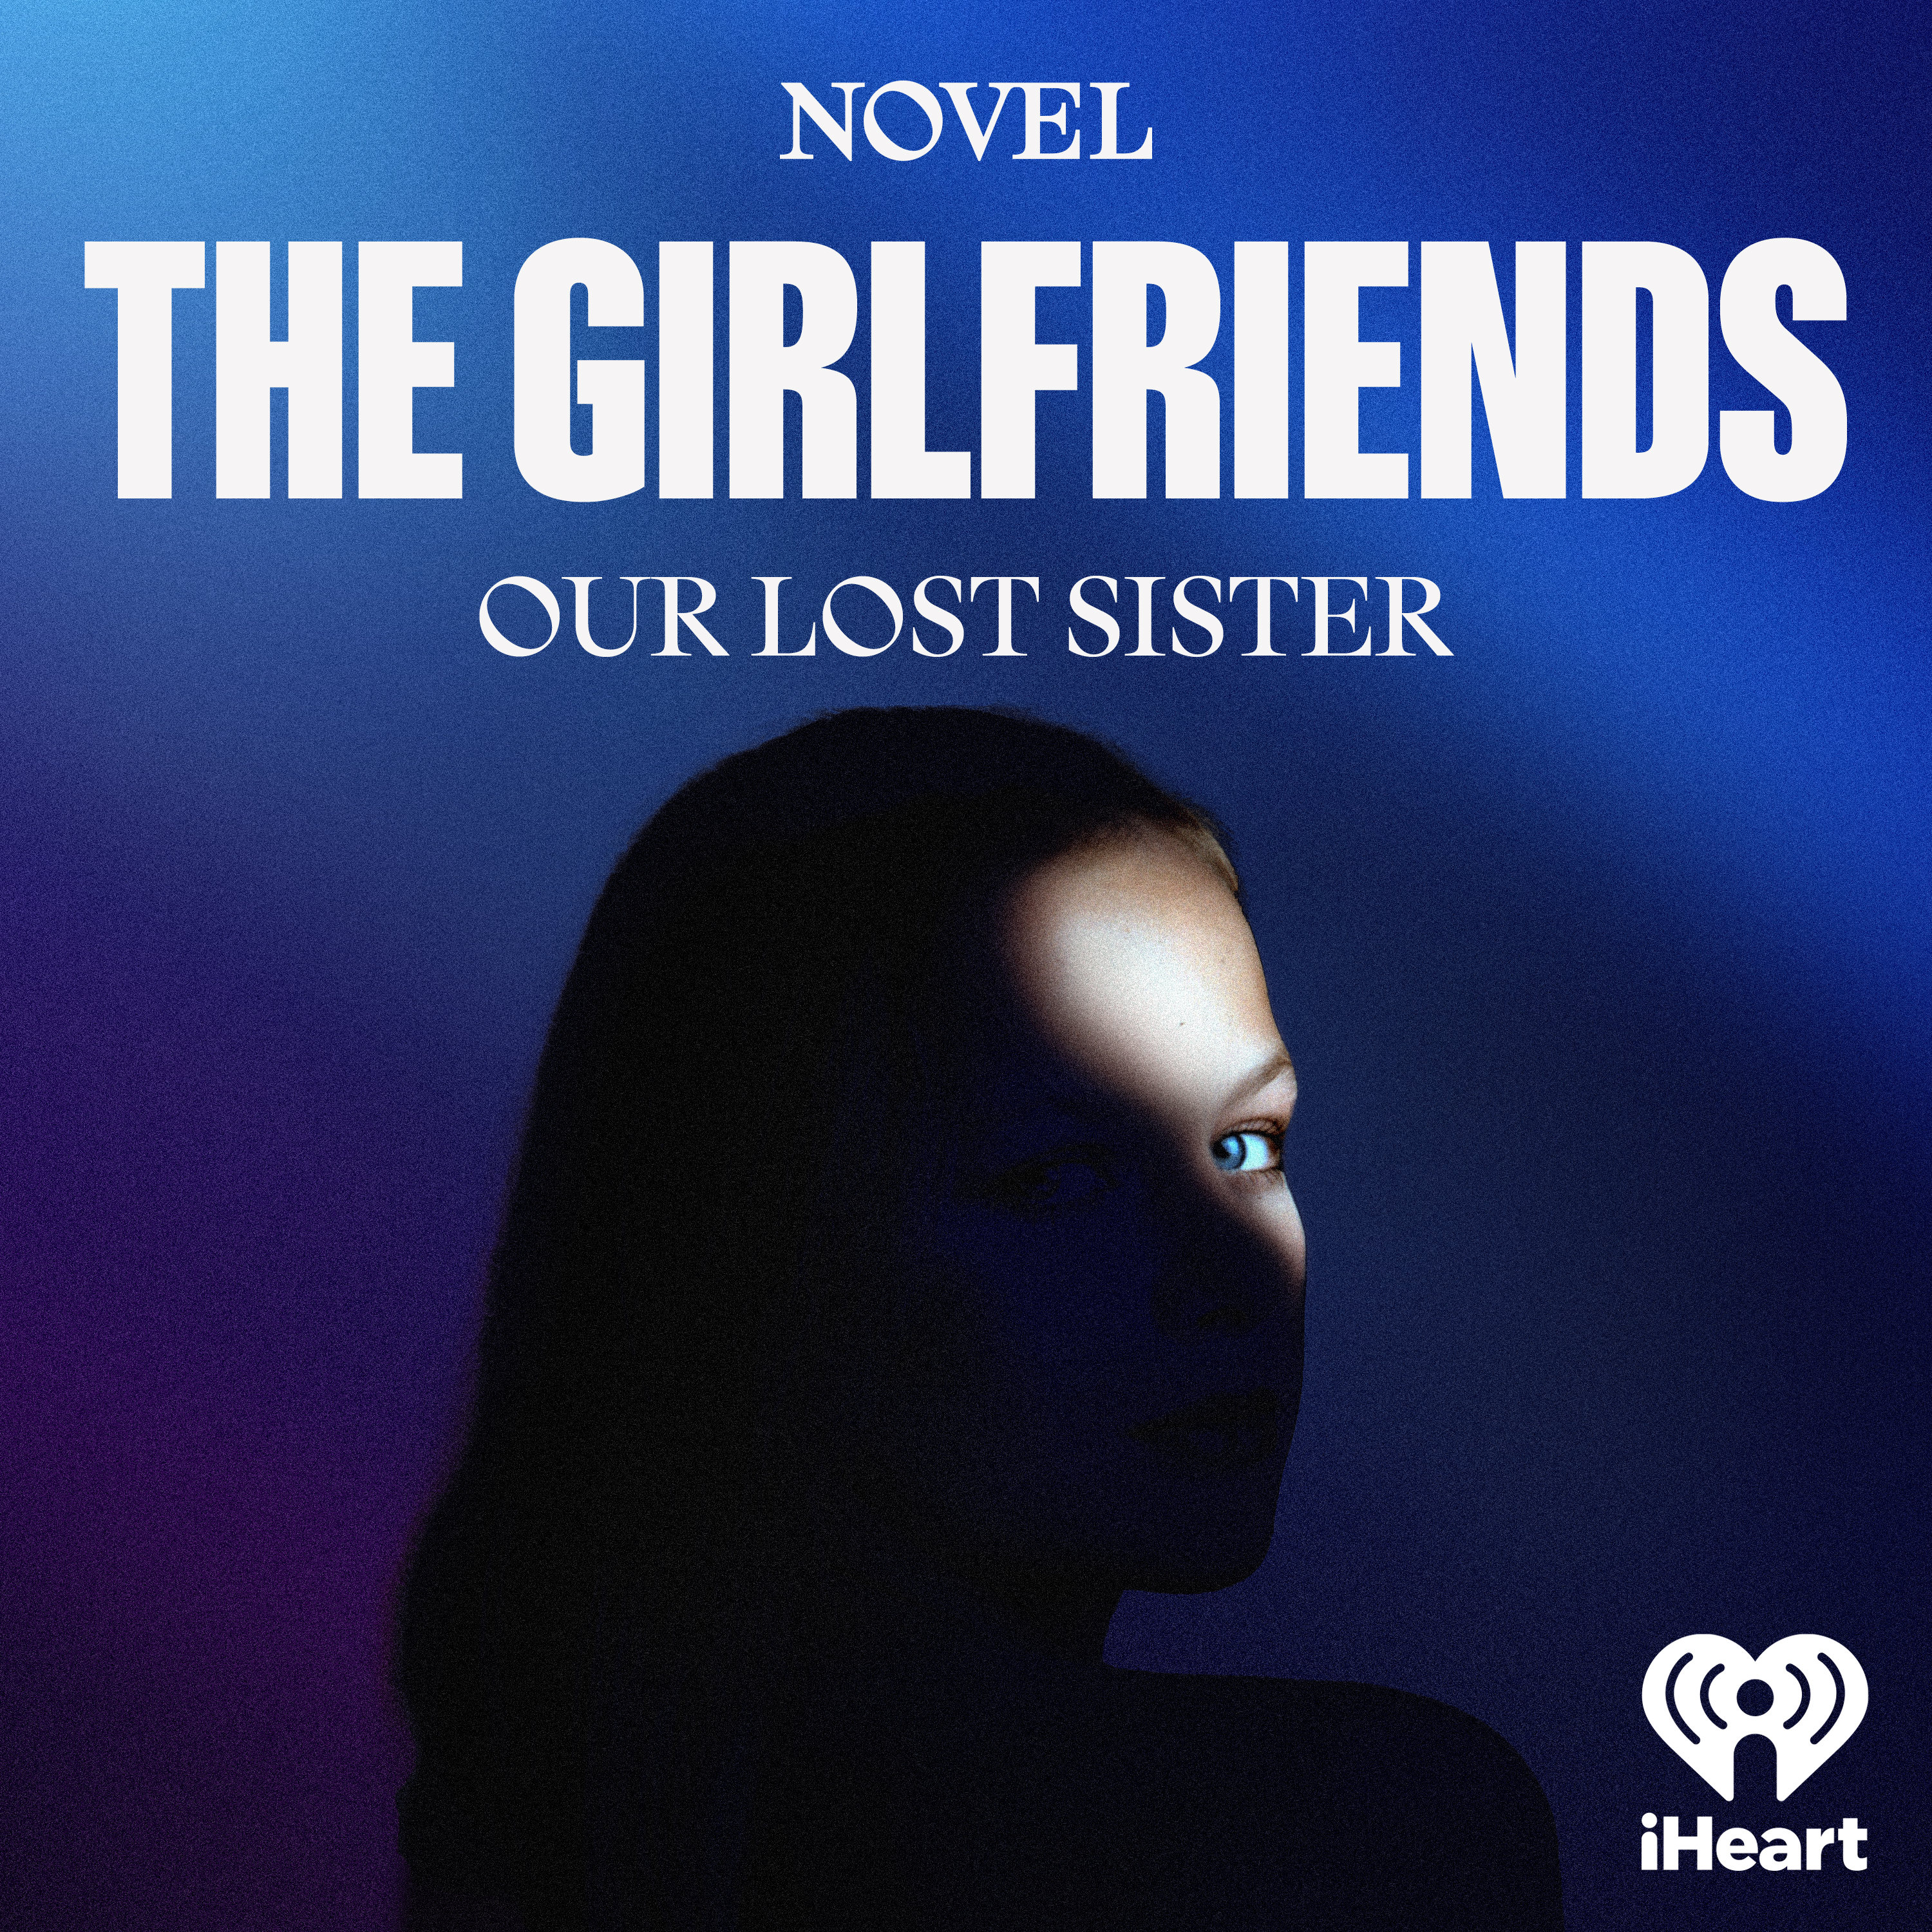 Introducing Season 2 of The Girlfriends: Our Lost Sister